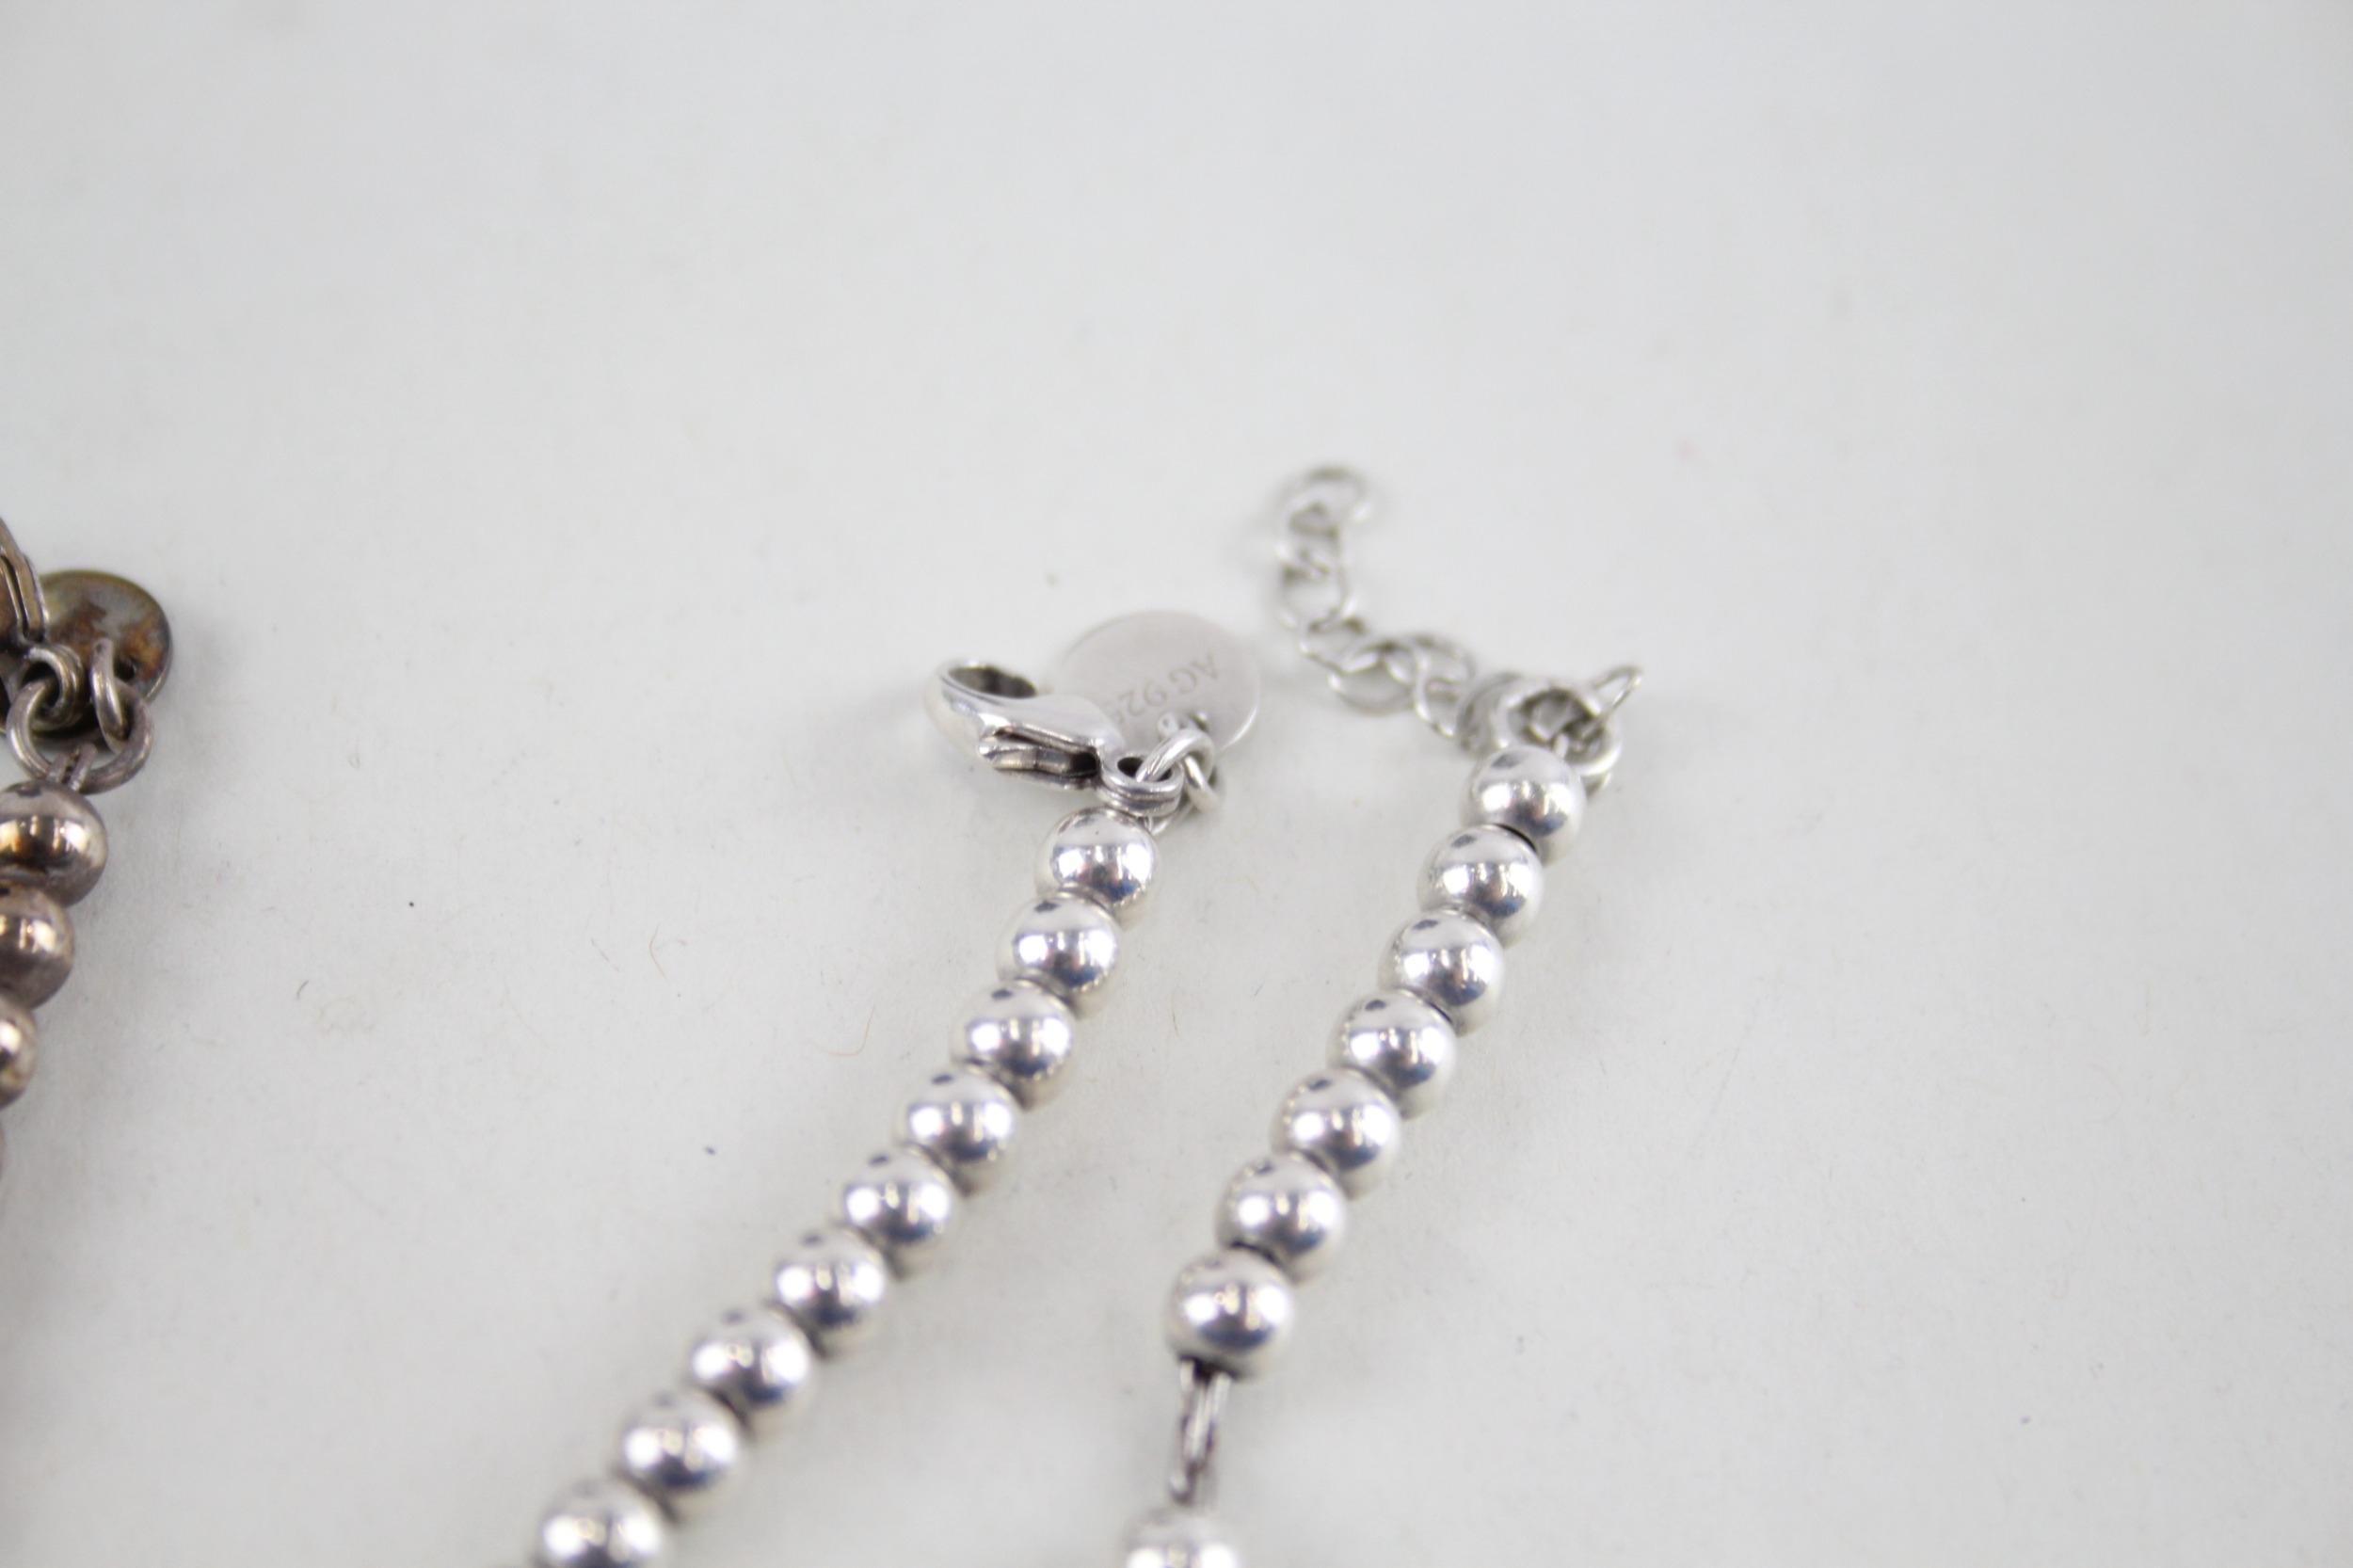 Two silver bracelets with enamel heart charms by designer Tiffany & Co (11g) - Image 5 of 7